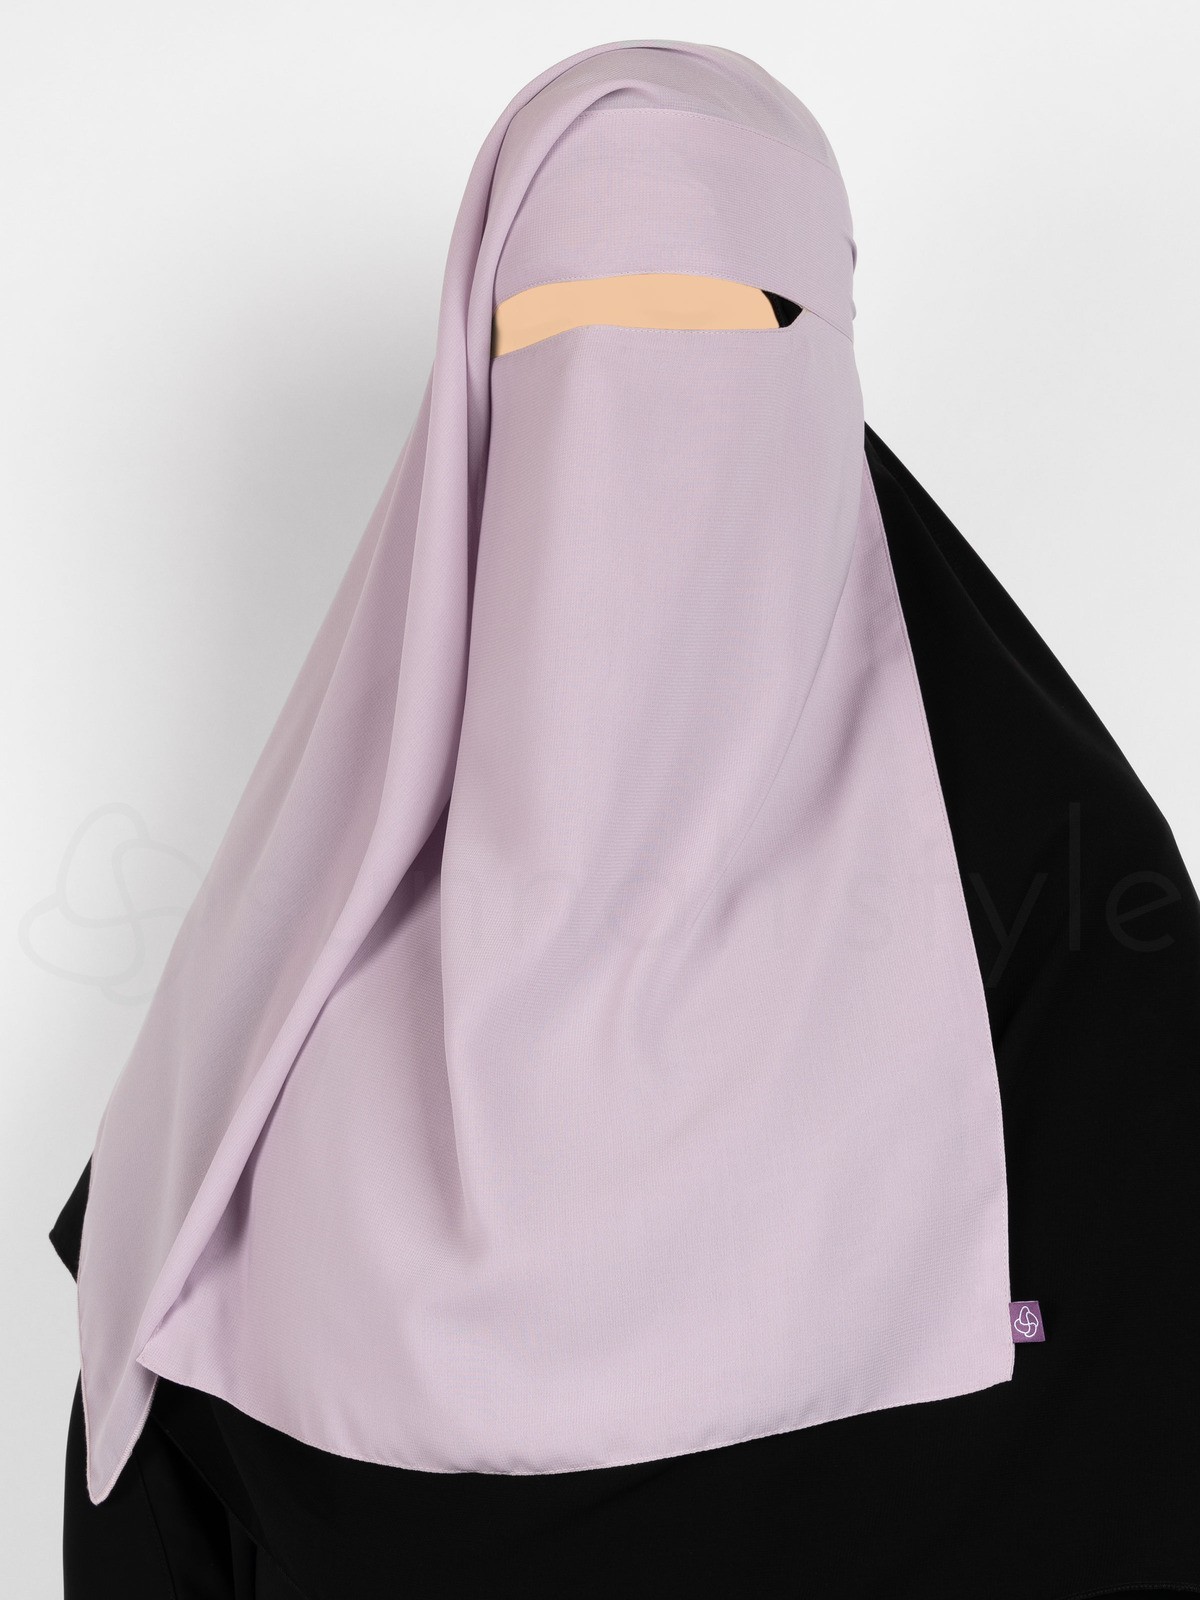 Sunnah Style - Narrow No-Pinch Two Layer Niqab (Cement)